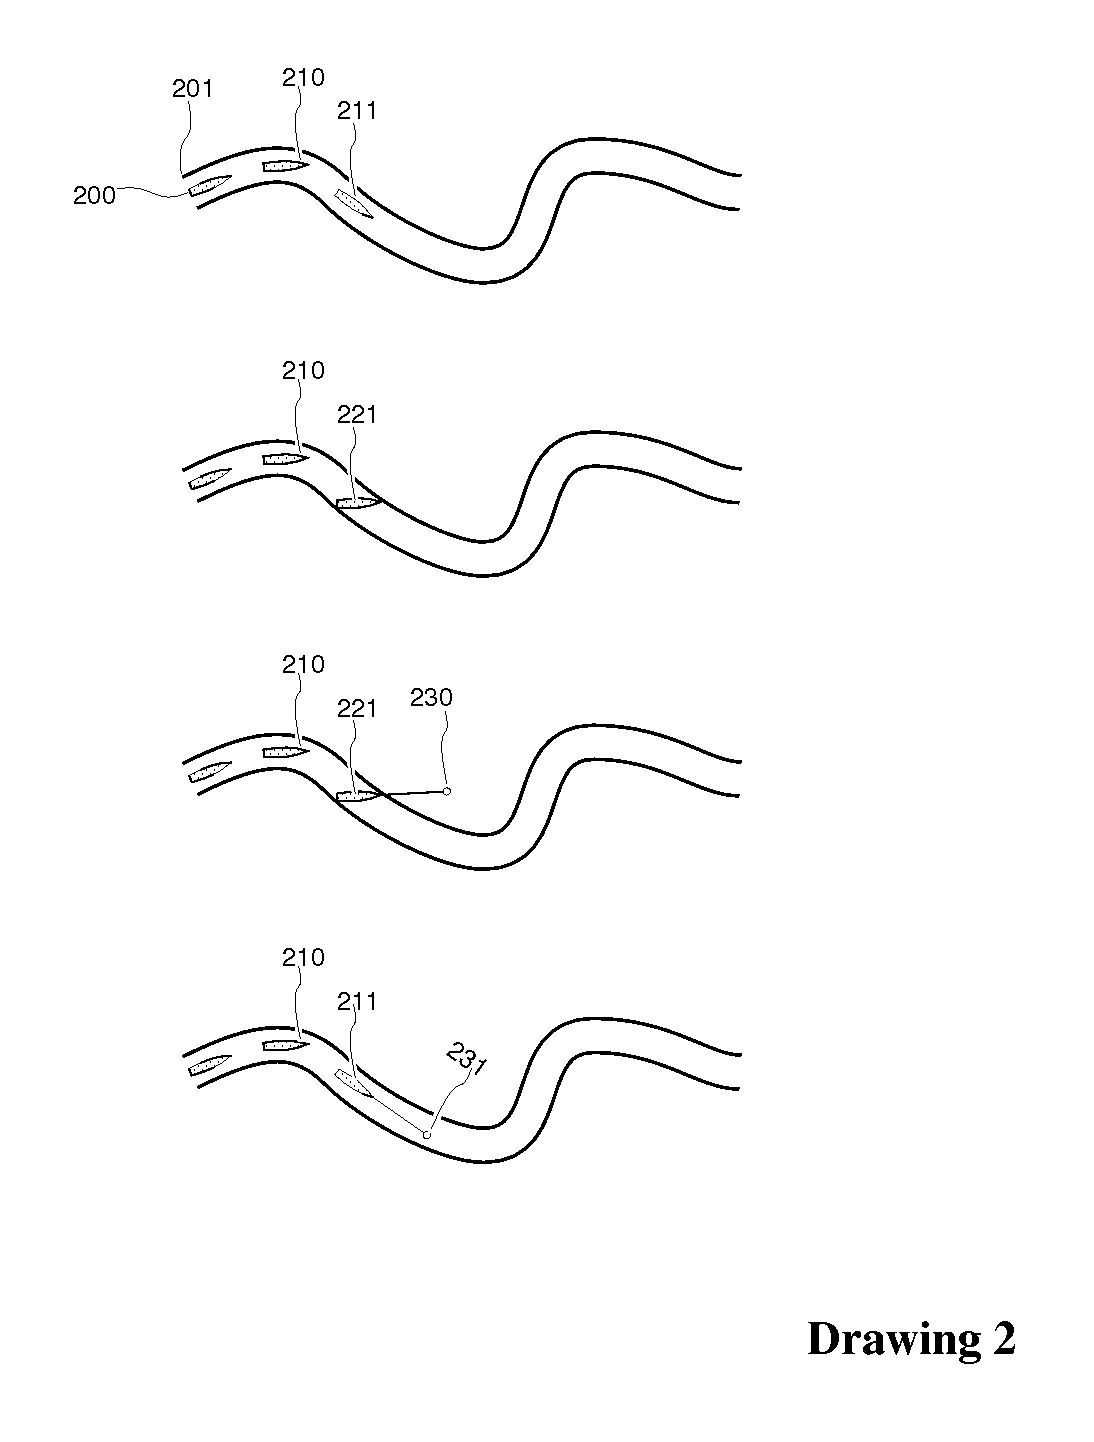 Computer input device enabling three degrees of freedom and related input and feedback methods